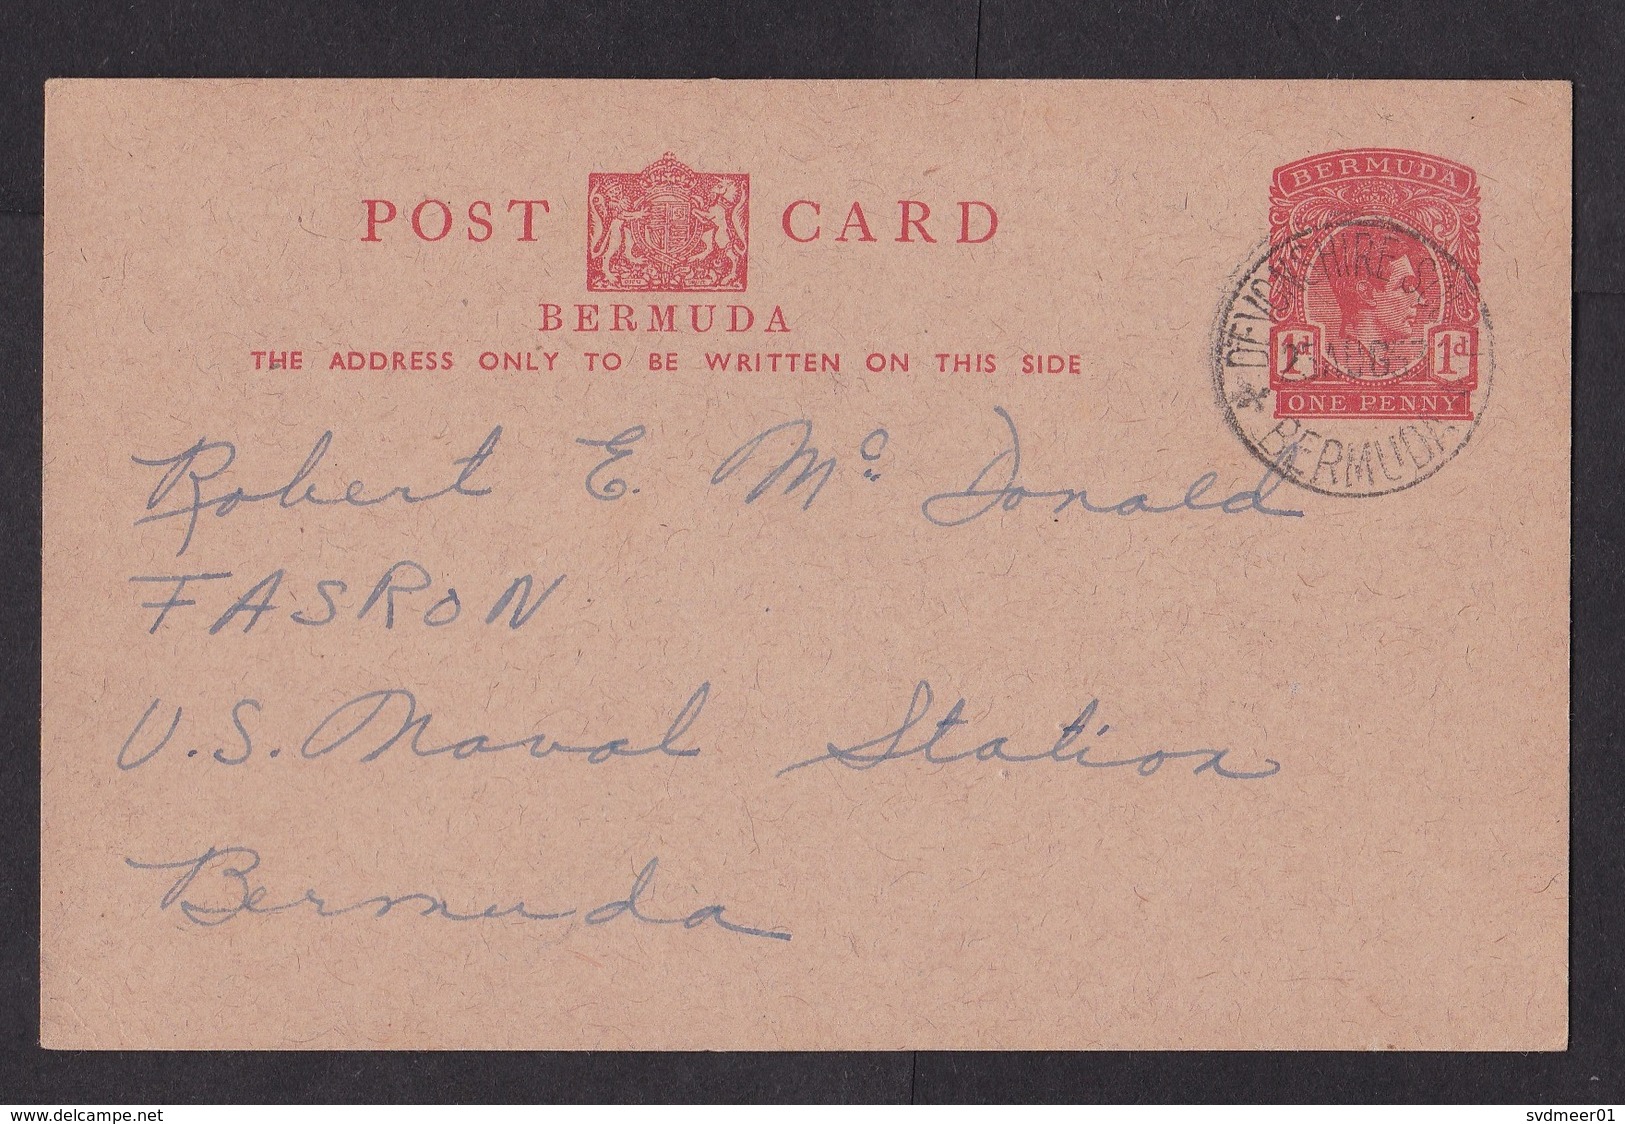 Bermuda: Stationery Postcard, 1953, King George VI, From Radio Society To US Naval Station (traces Of Use) - Bermuda